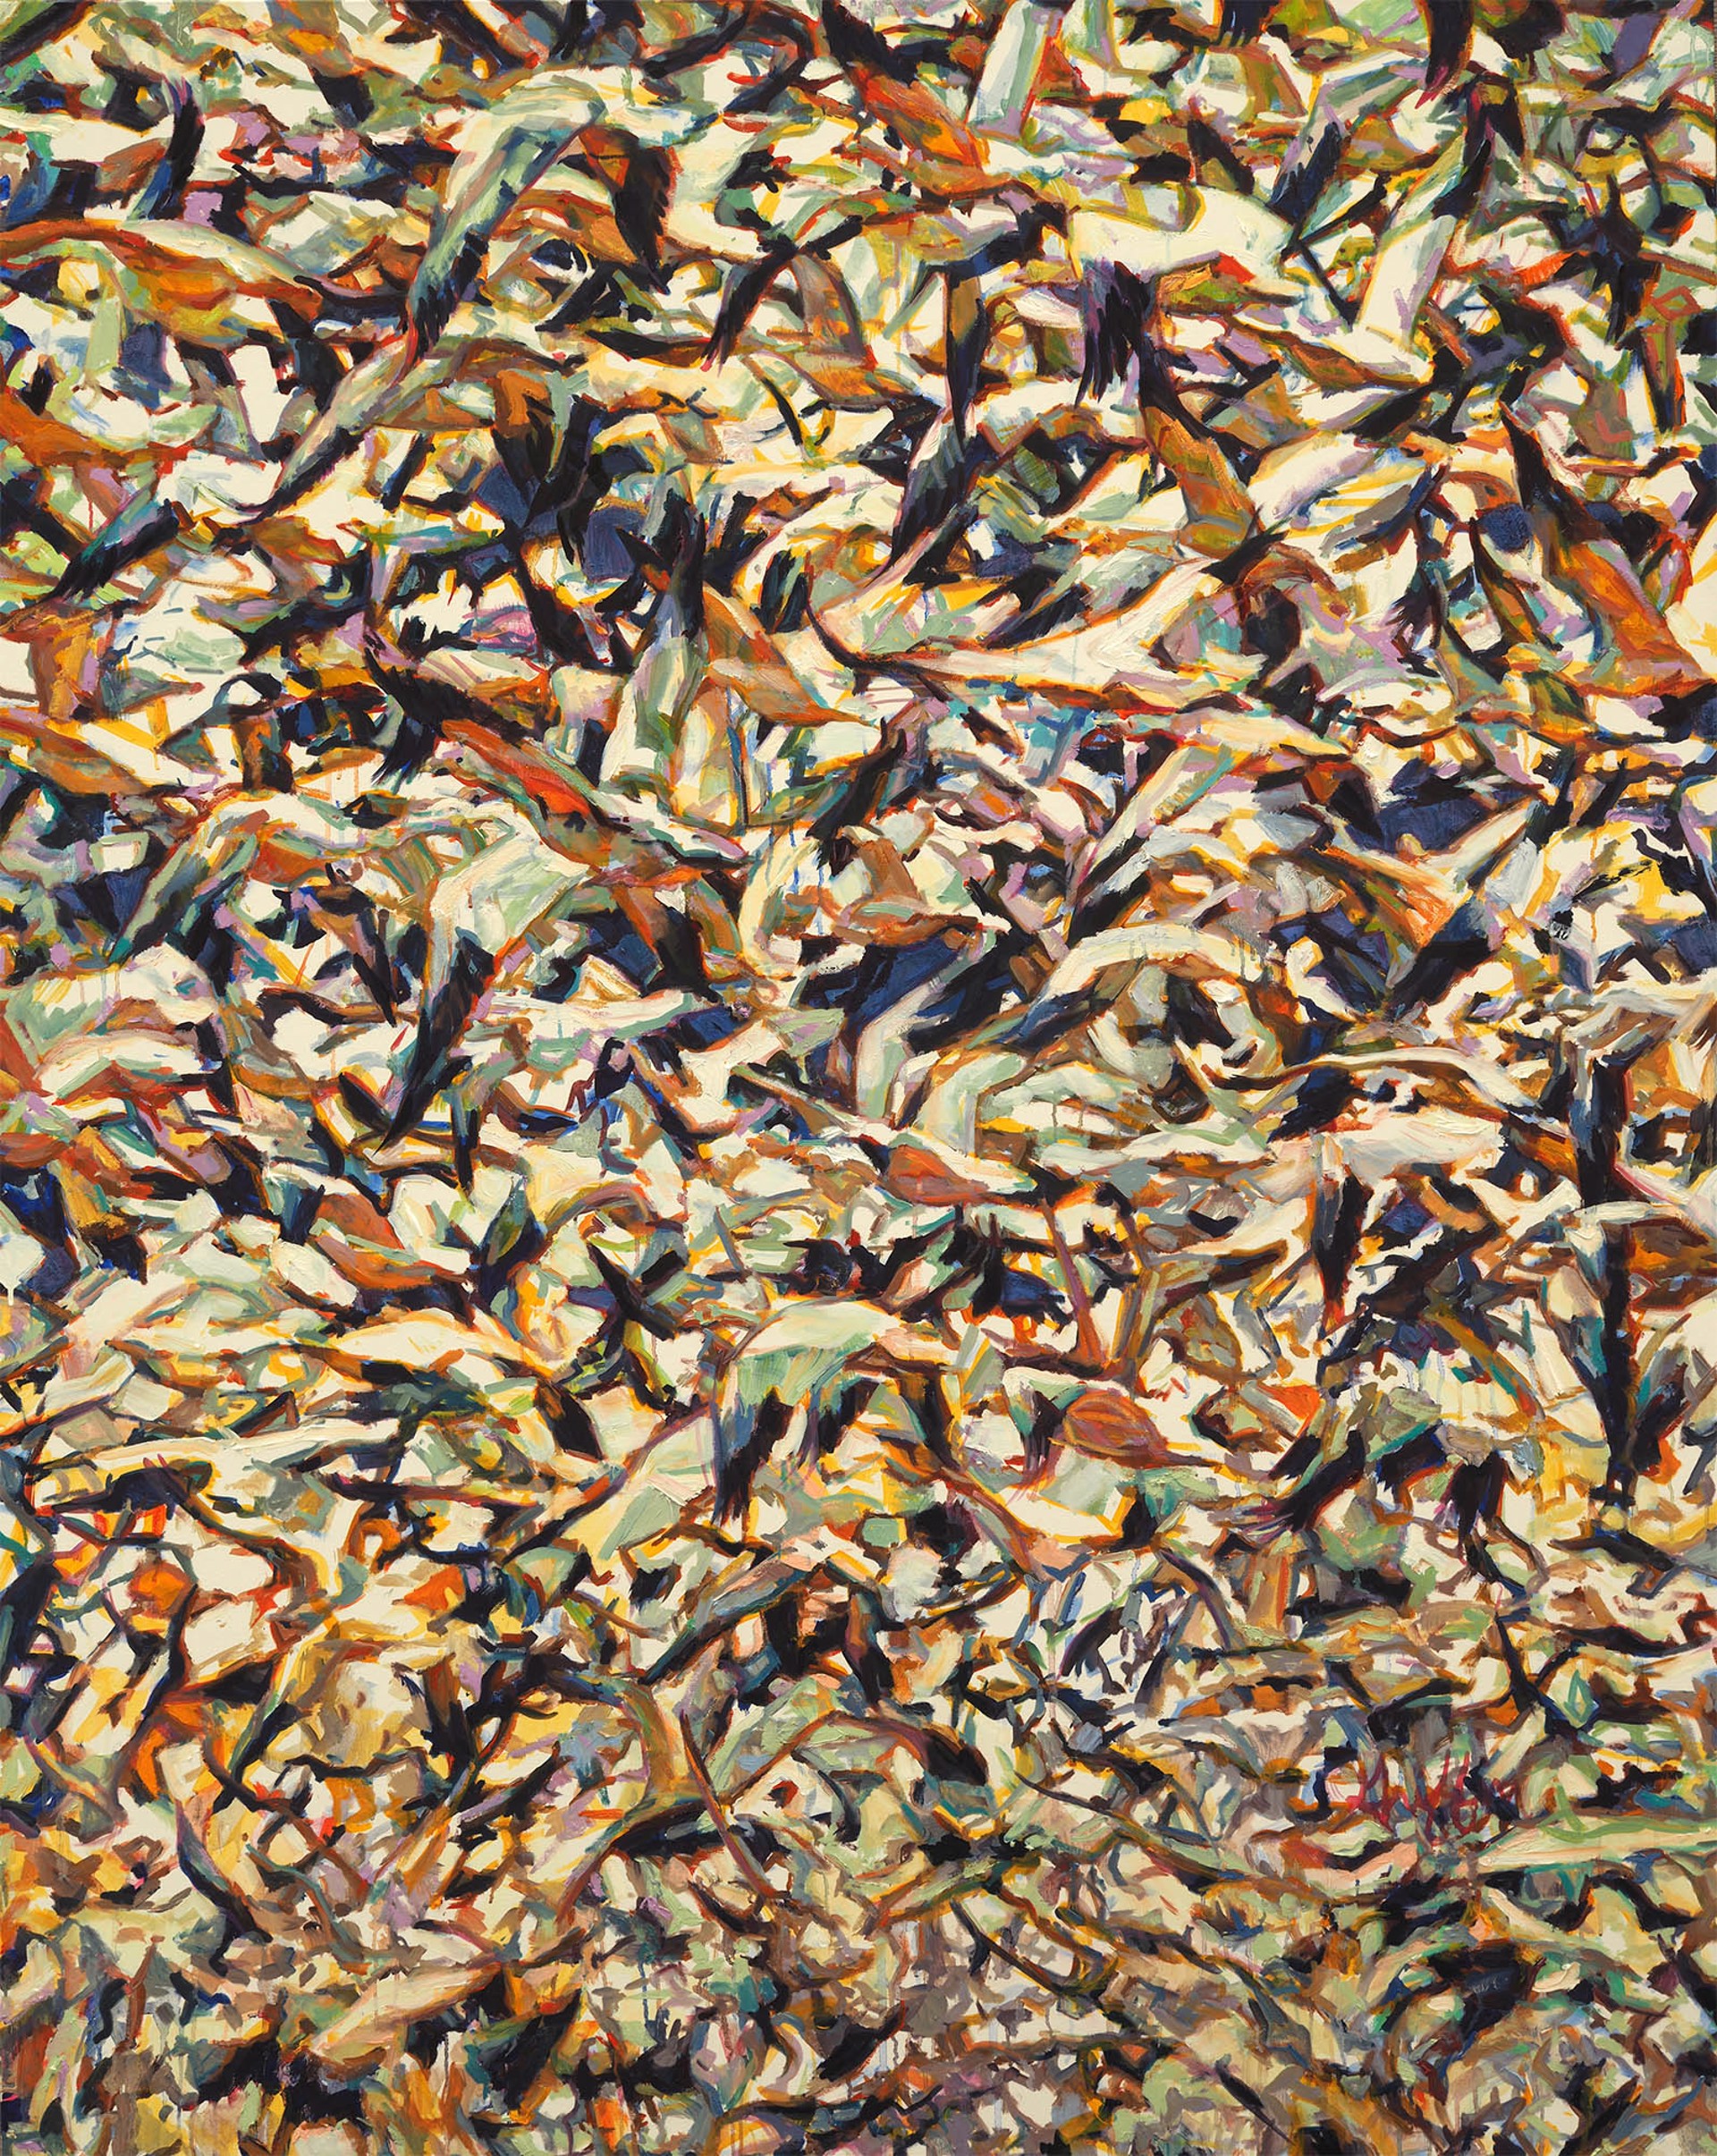 Original Oil Painting Featuring A Mass Of Migrating Snow Geese In Flight Up Close Without Sky